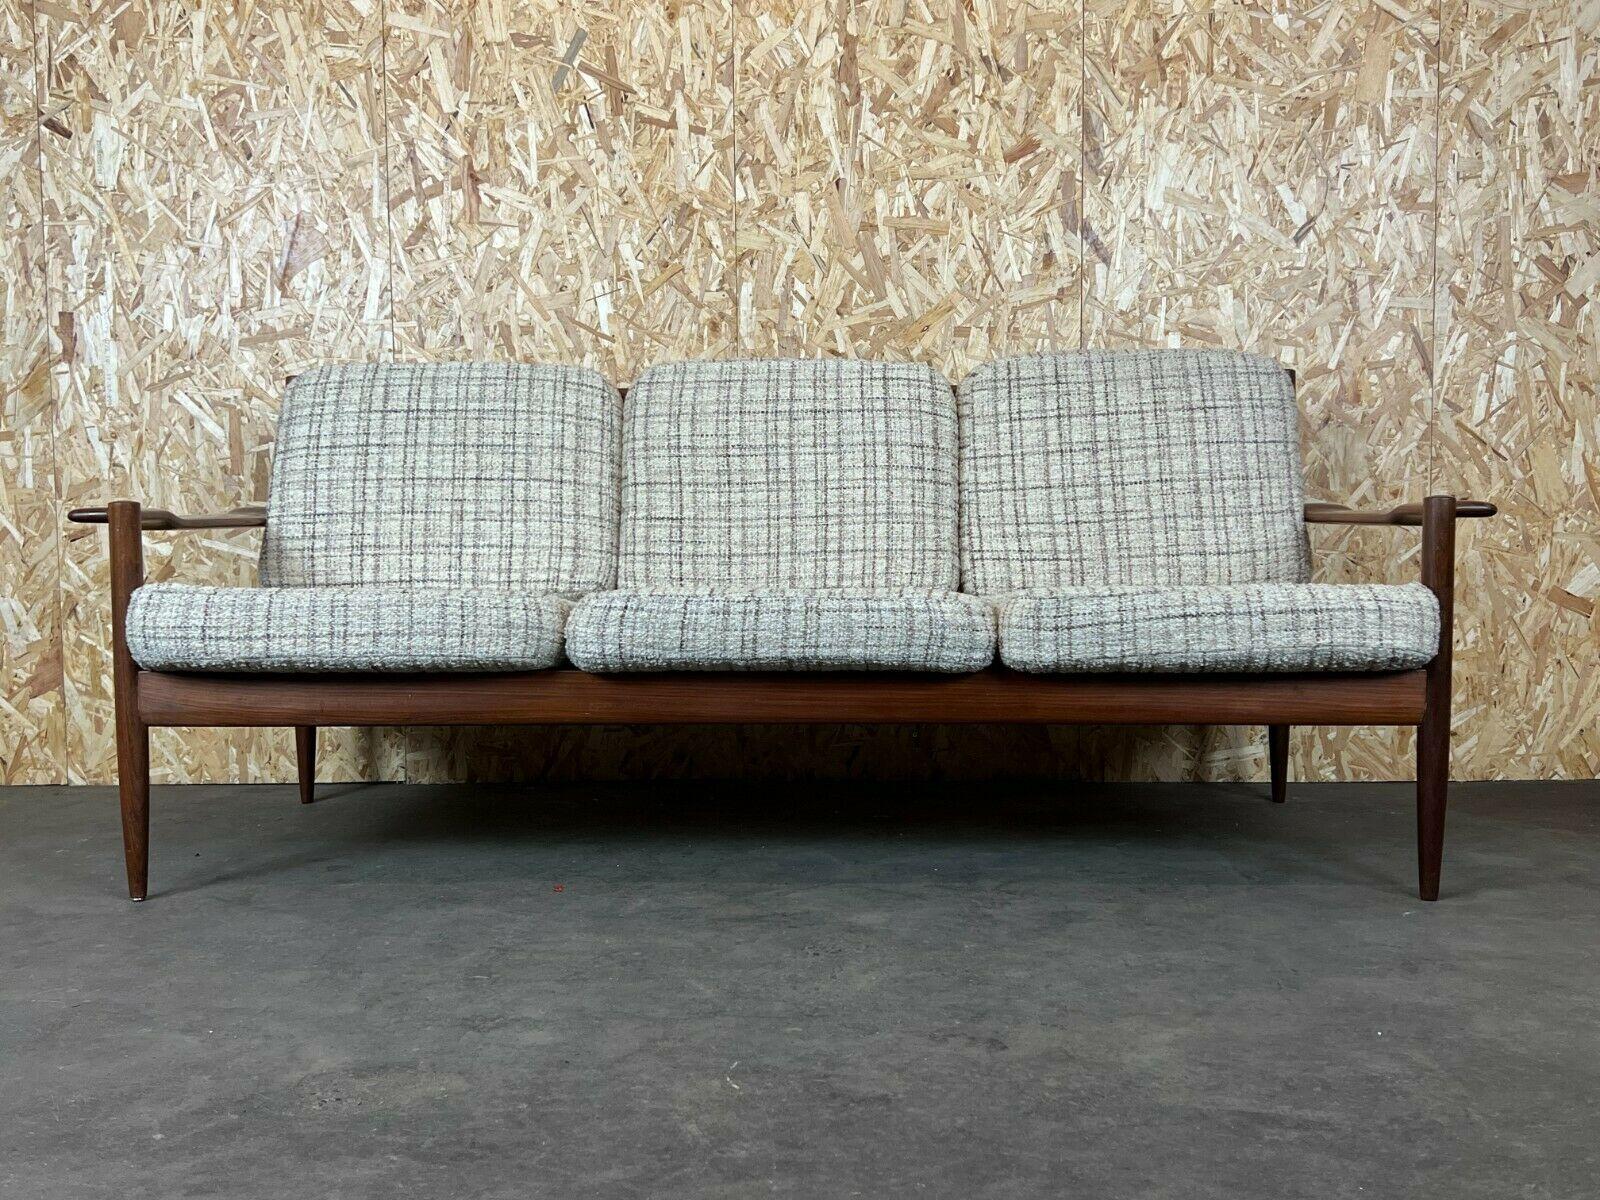 60s 70s teak sofa 3 seater couch seating set Danish Modern Design Denmark

Object: sofa

Manufacturer:

Condition: good - vintage

Age: around 1960-1970

Dimensions:

184.5cm x 79cm x 77cm
Seat height = 42cm

Other notes:

The